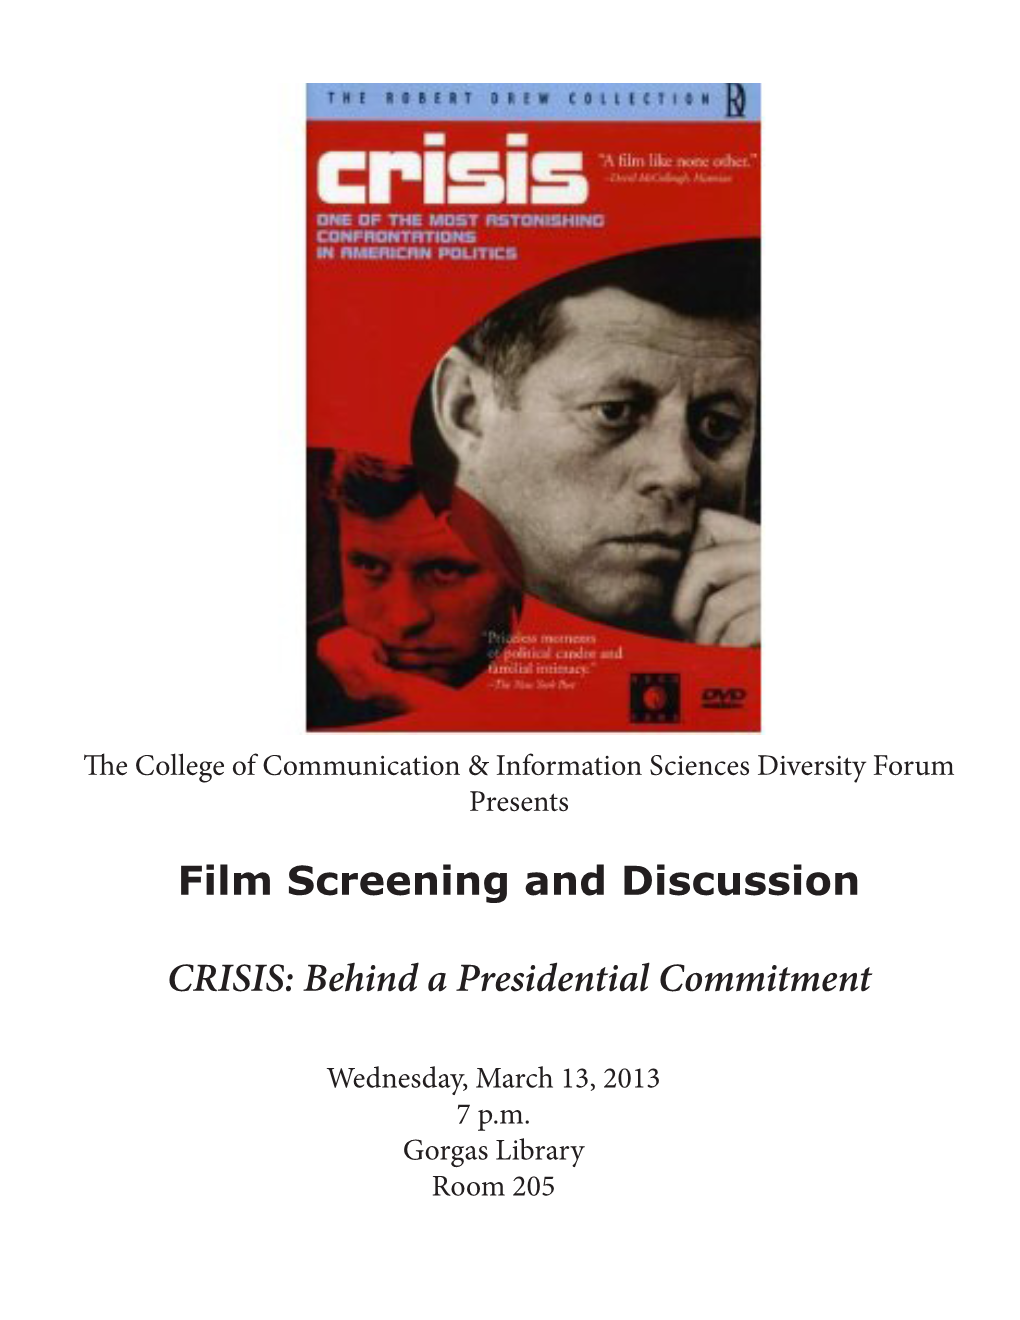 Film Screening and Discussion CRISIS: Behind a Presidential